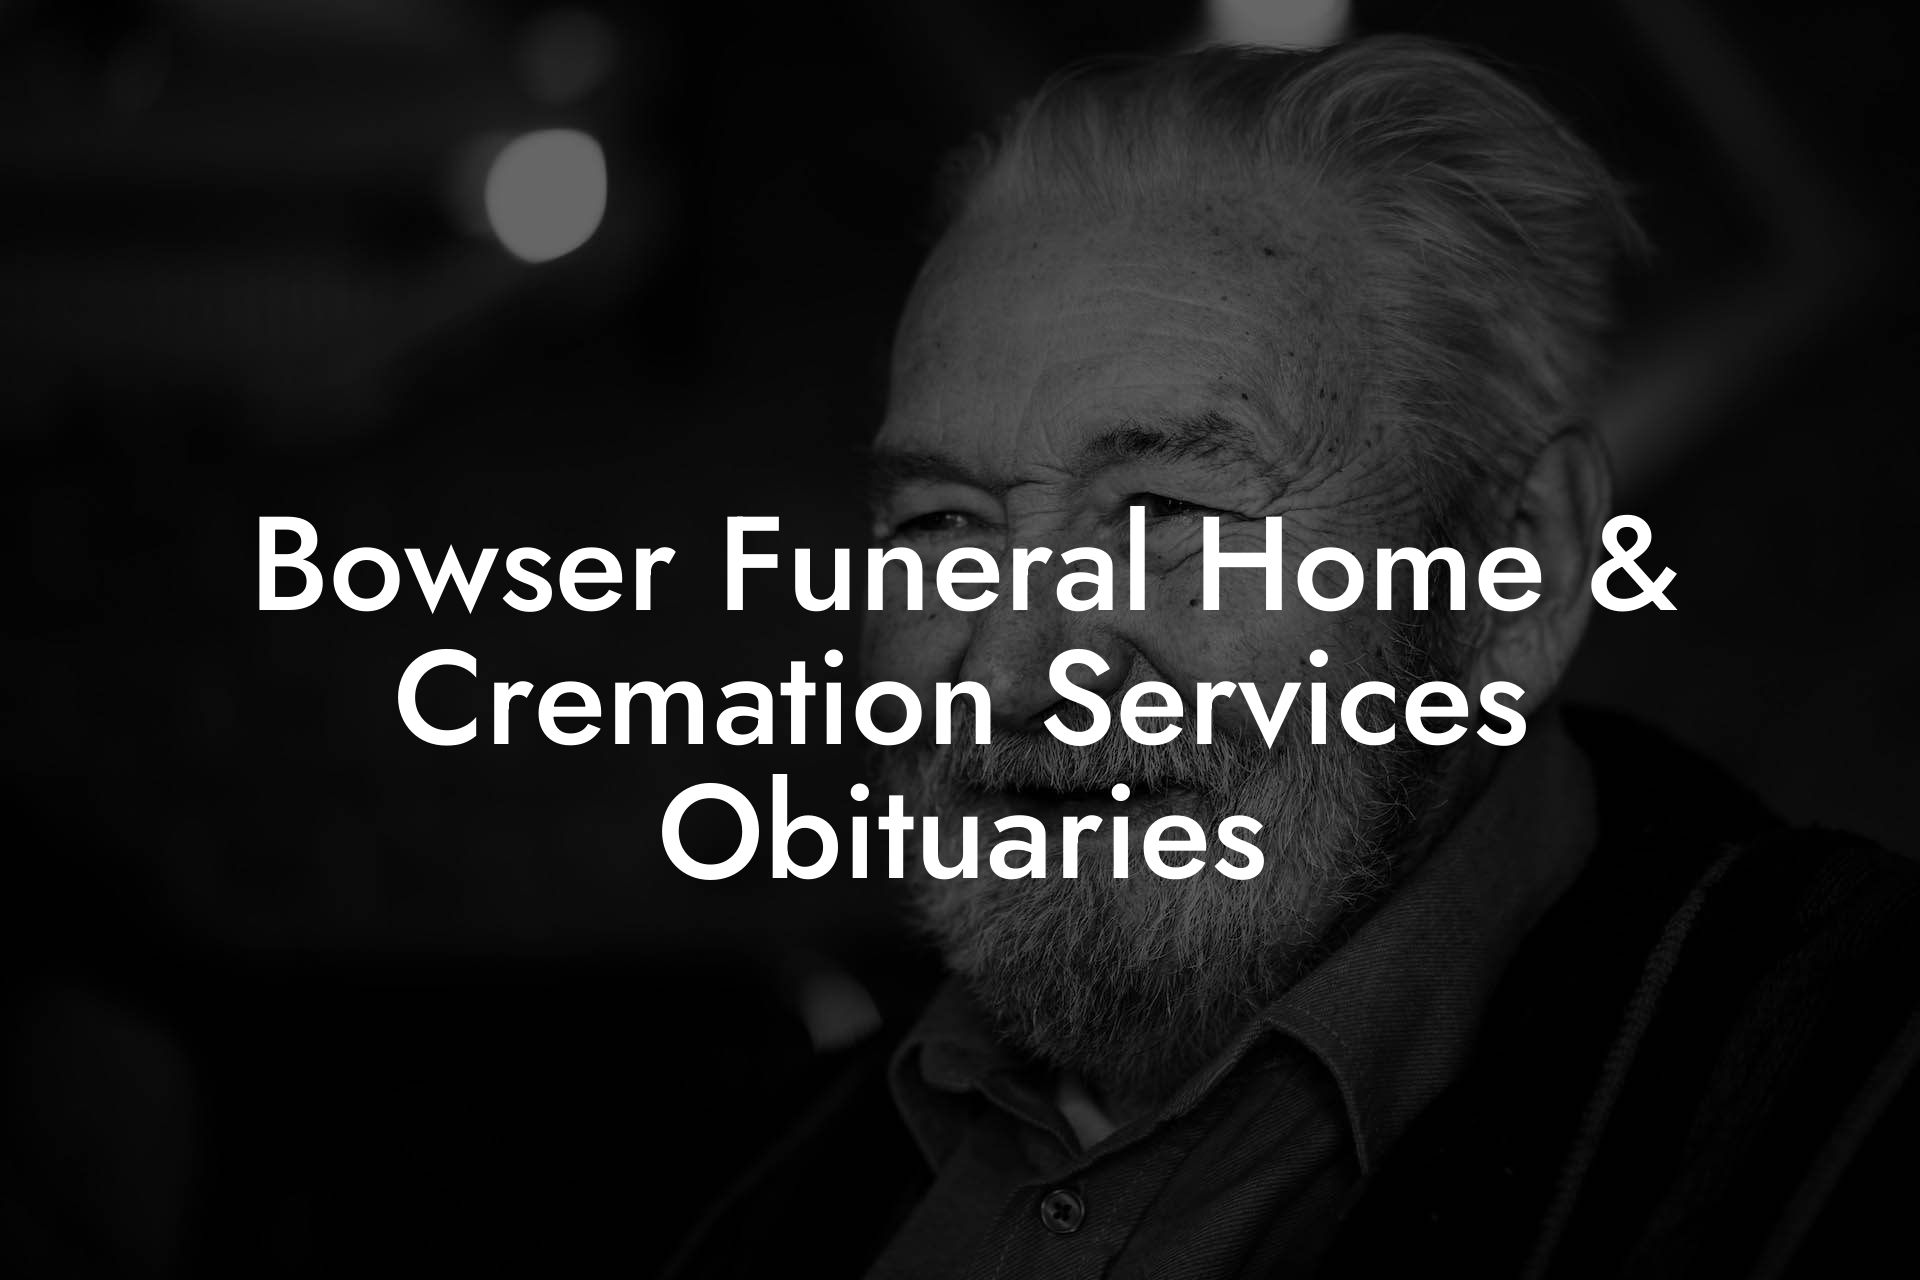 Bowser Funeral Home & Cremation Services Obituaries